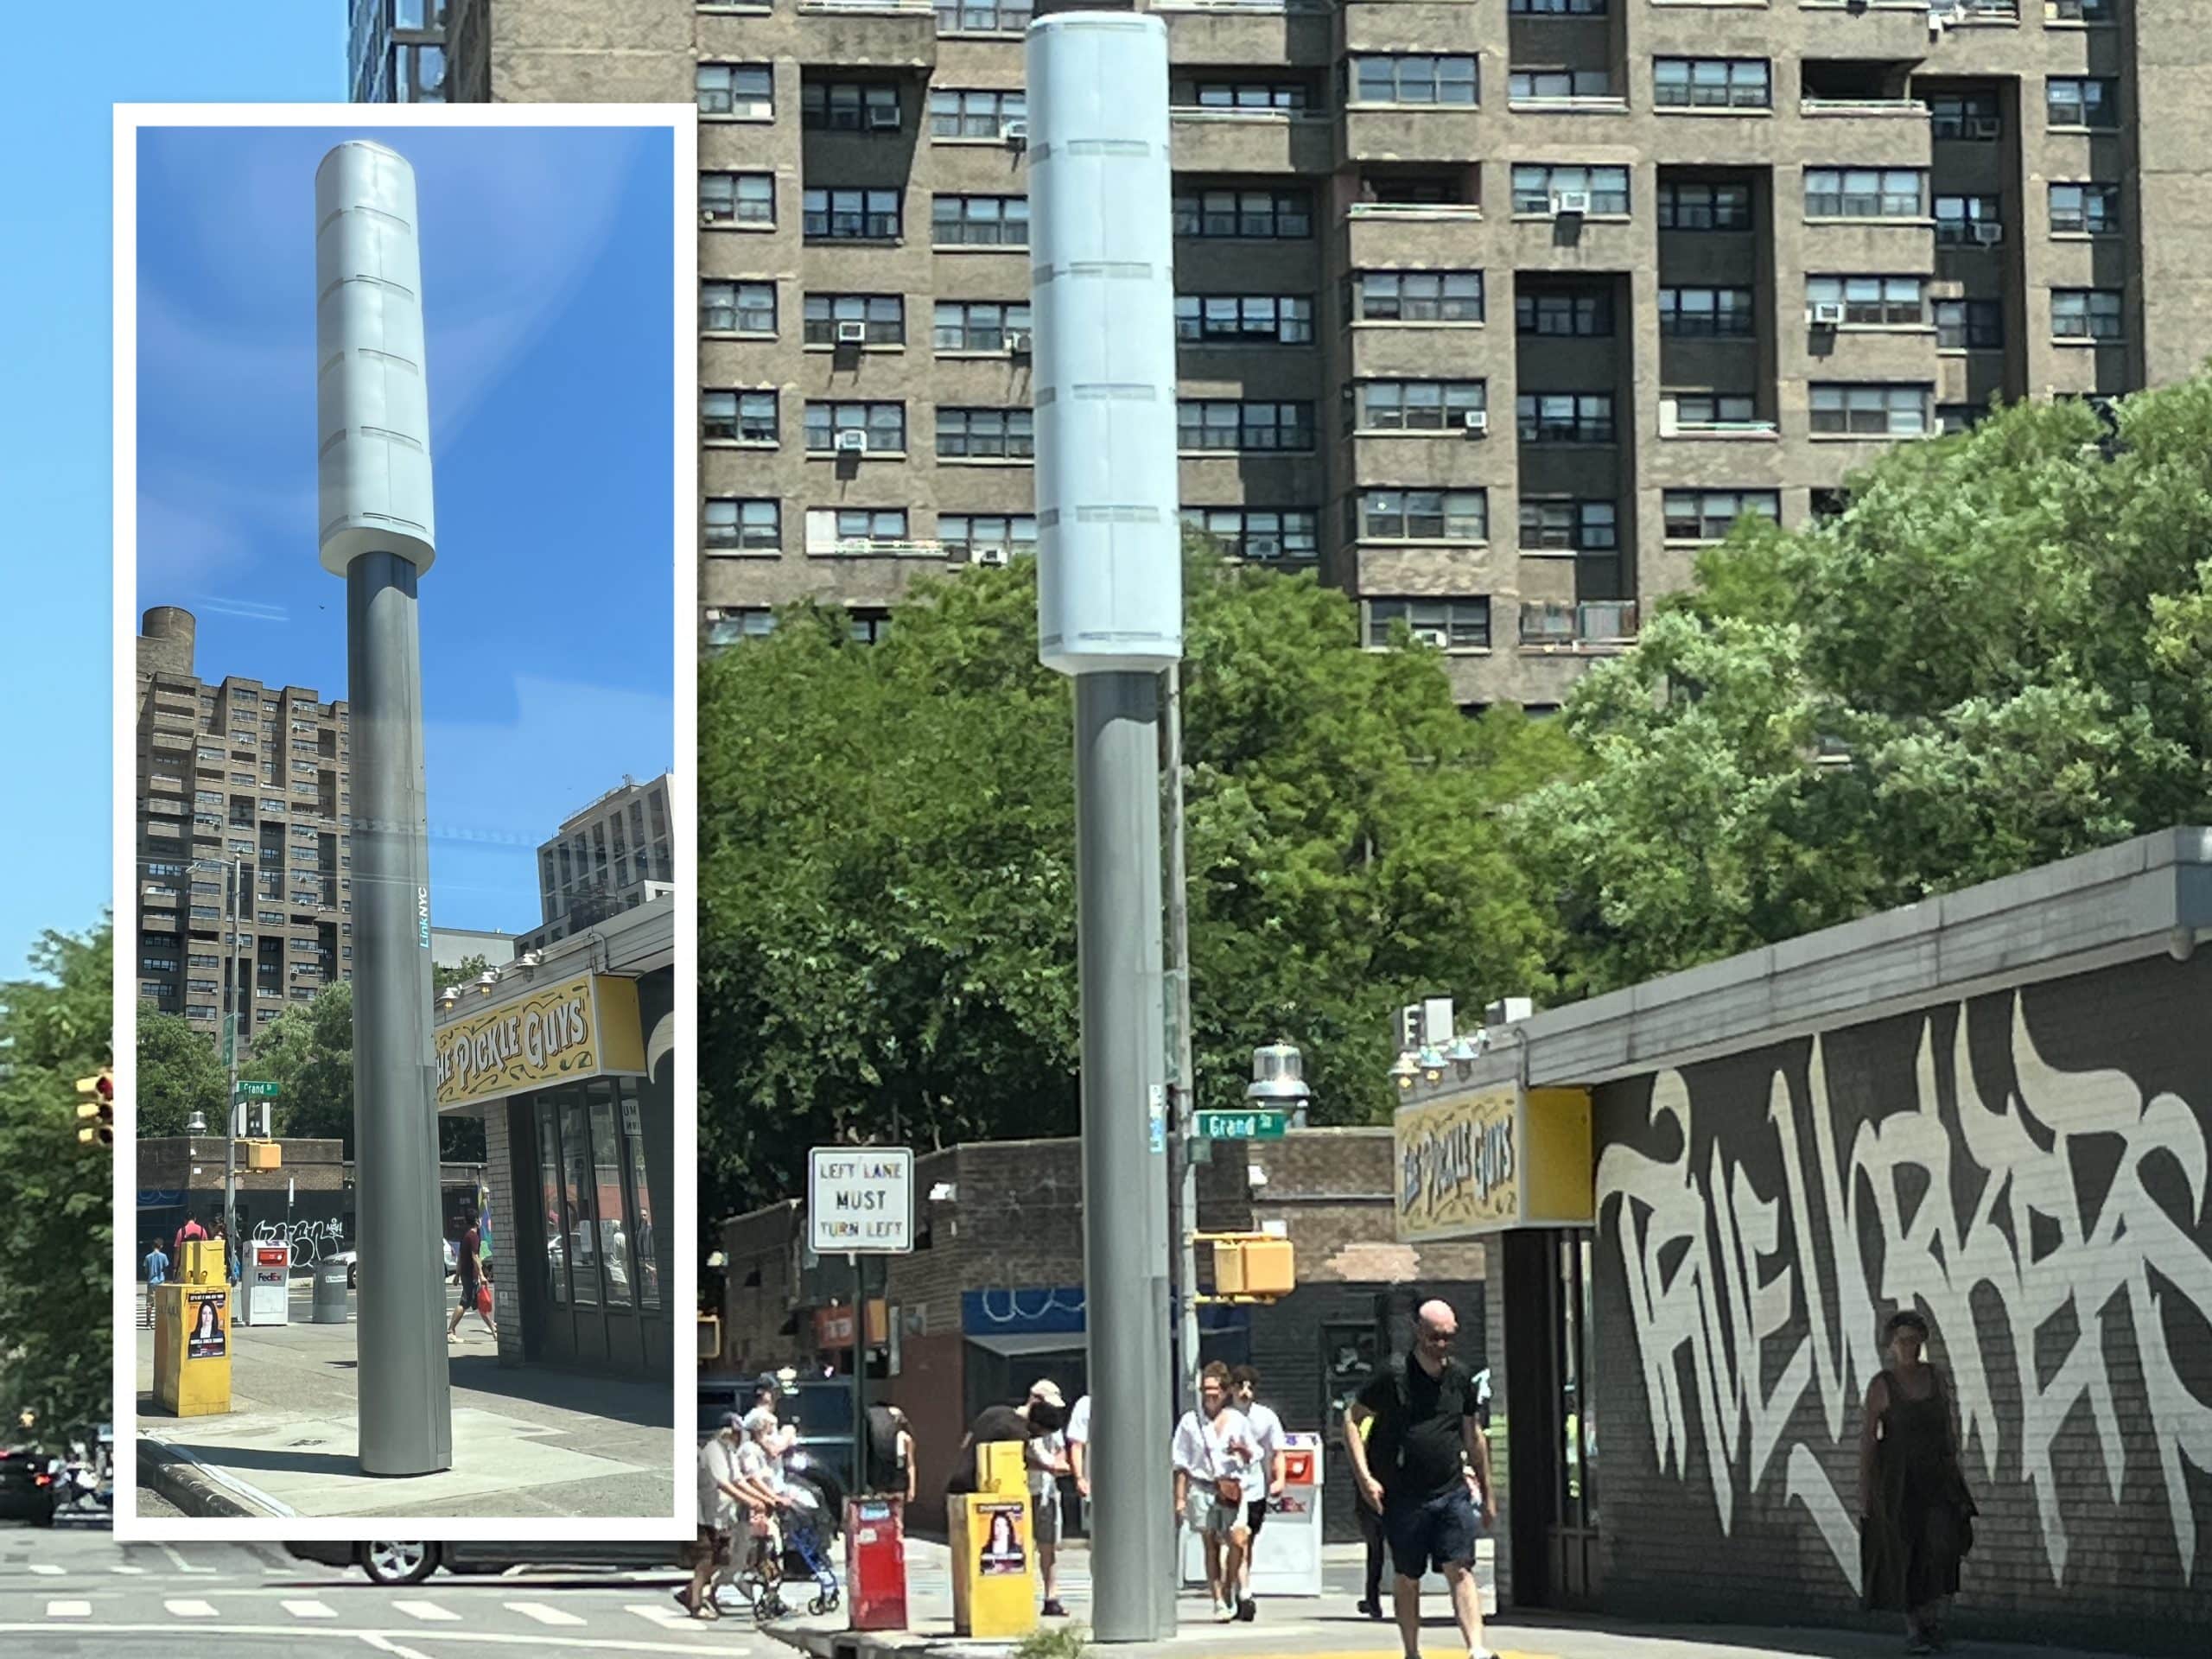 The City plans to allow 18 of these 32-foot tall Link5G towers to be installed on the UES | Upper East Site